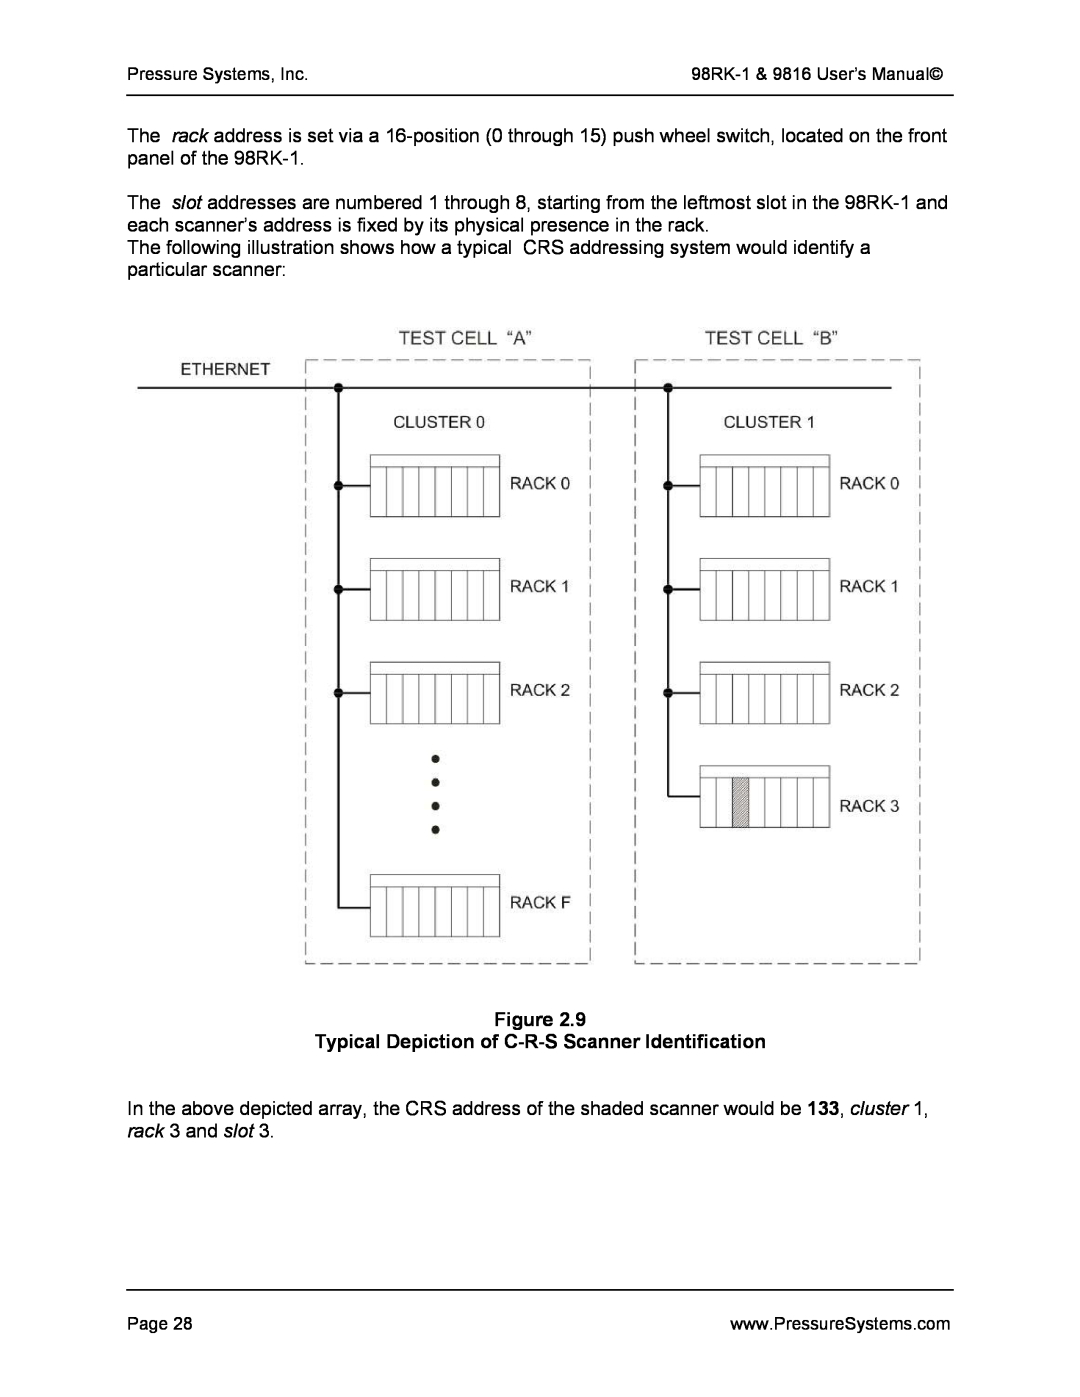 Pressure Systems 98RK-1 user manual Typical Depiction of C-R-S Scanner Identification 